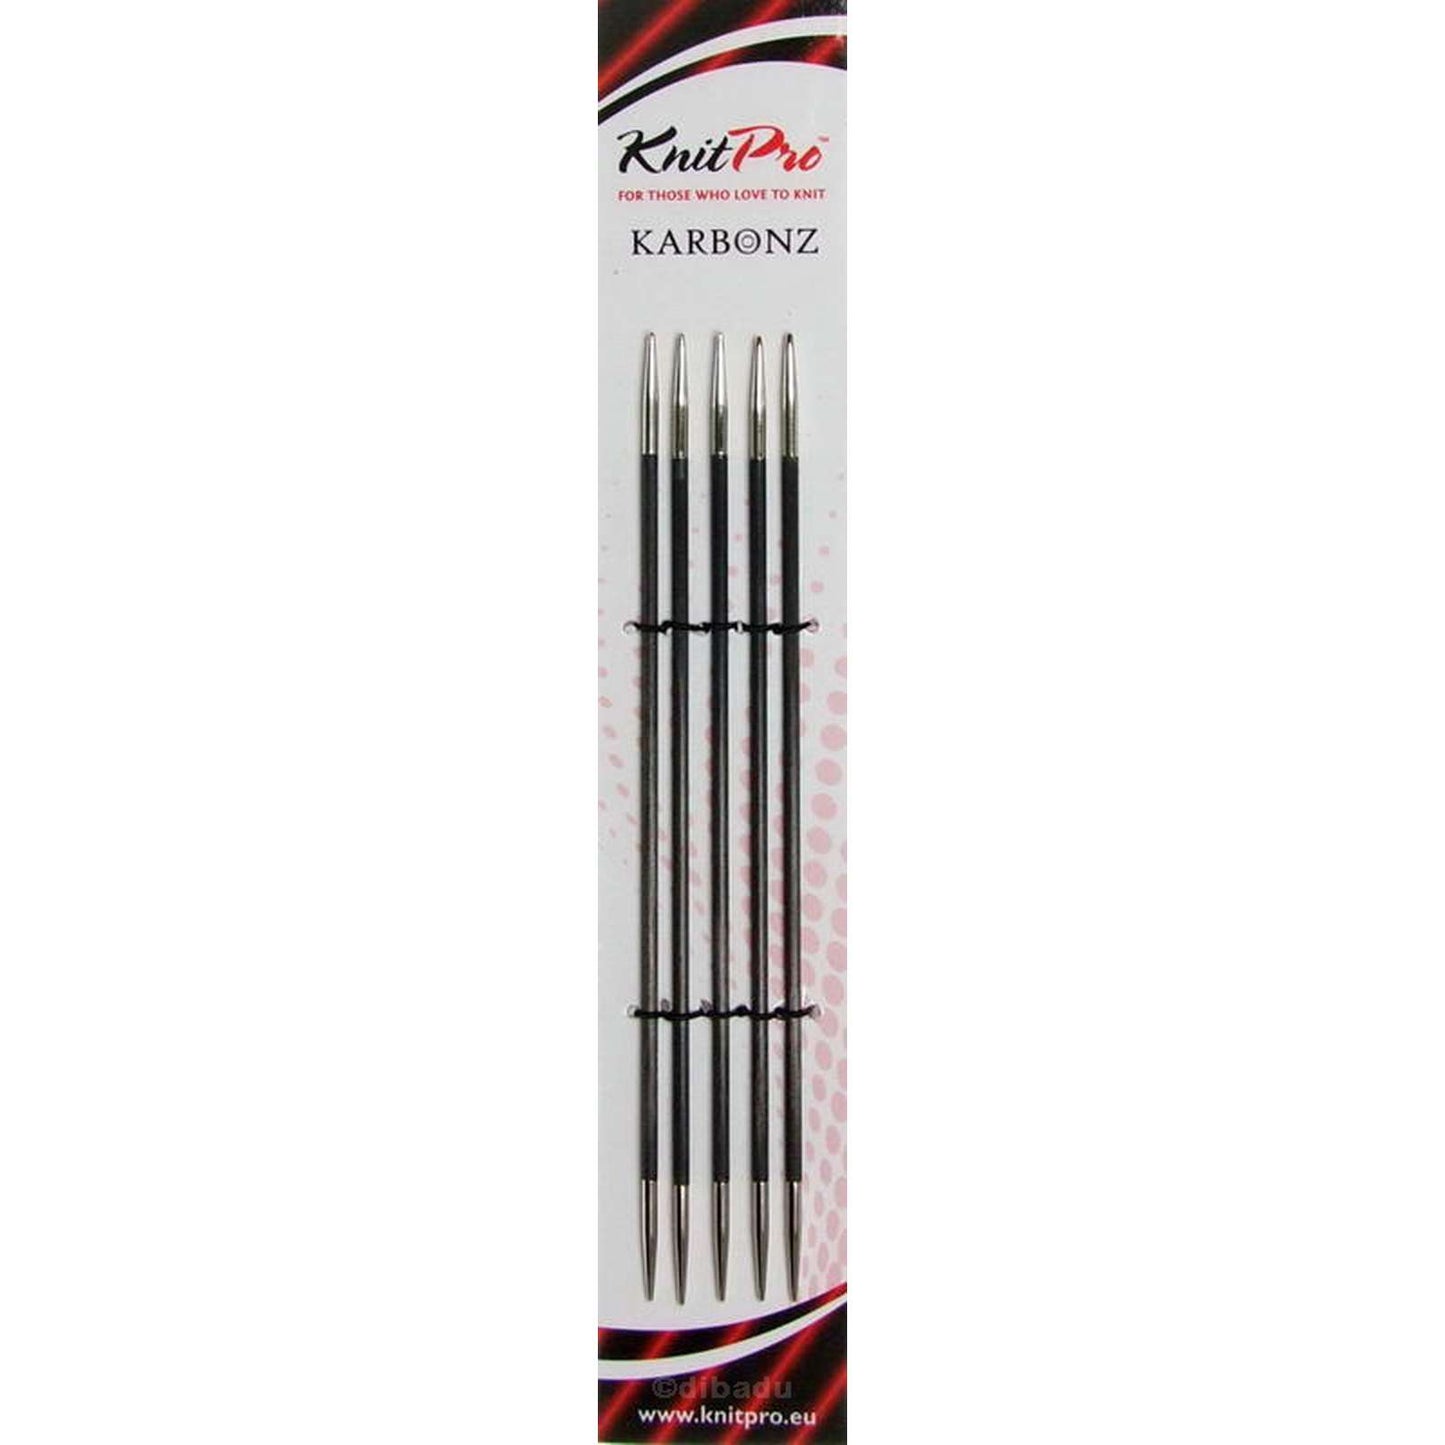 KnitPro Karbonz Double Pointed Needles - 15cm